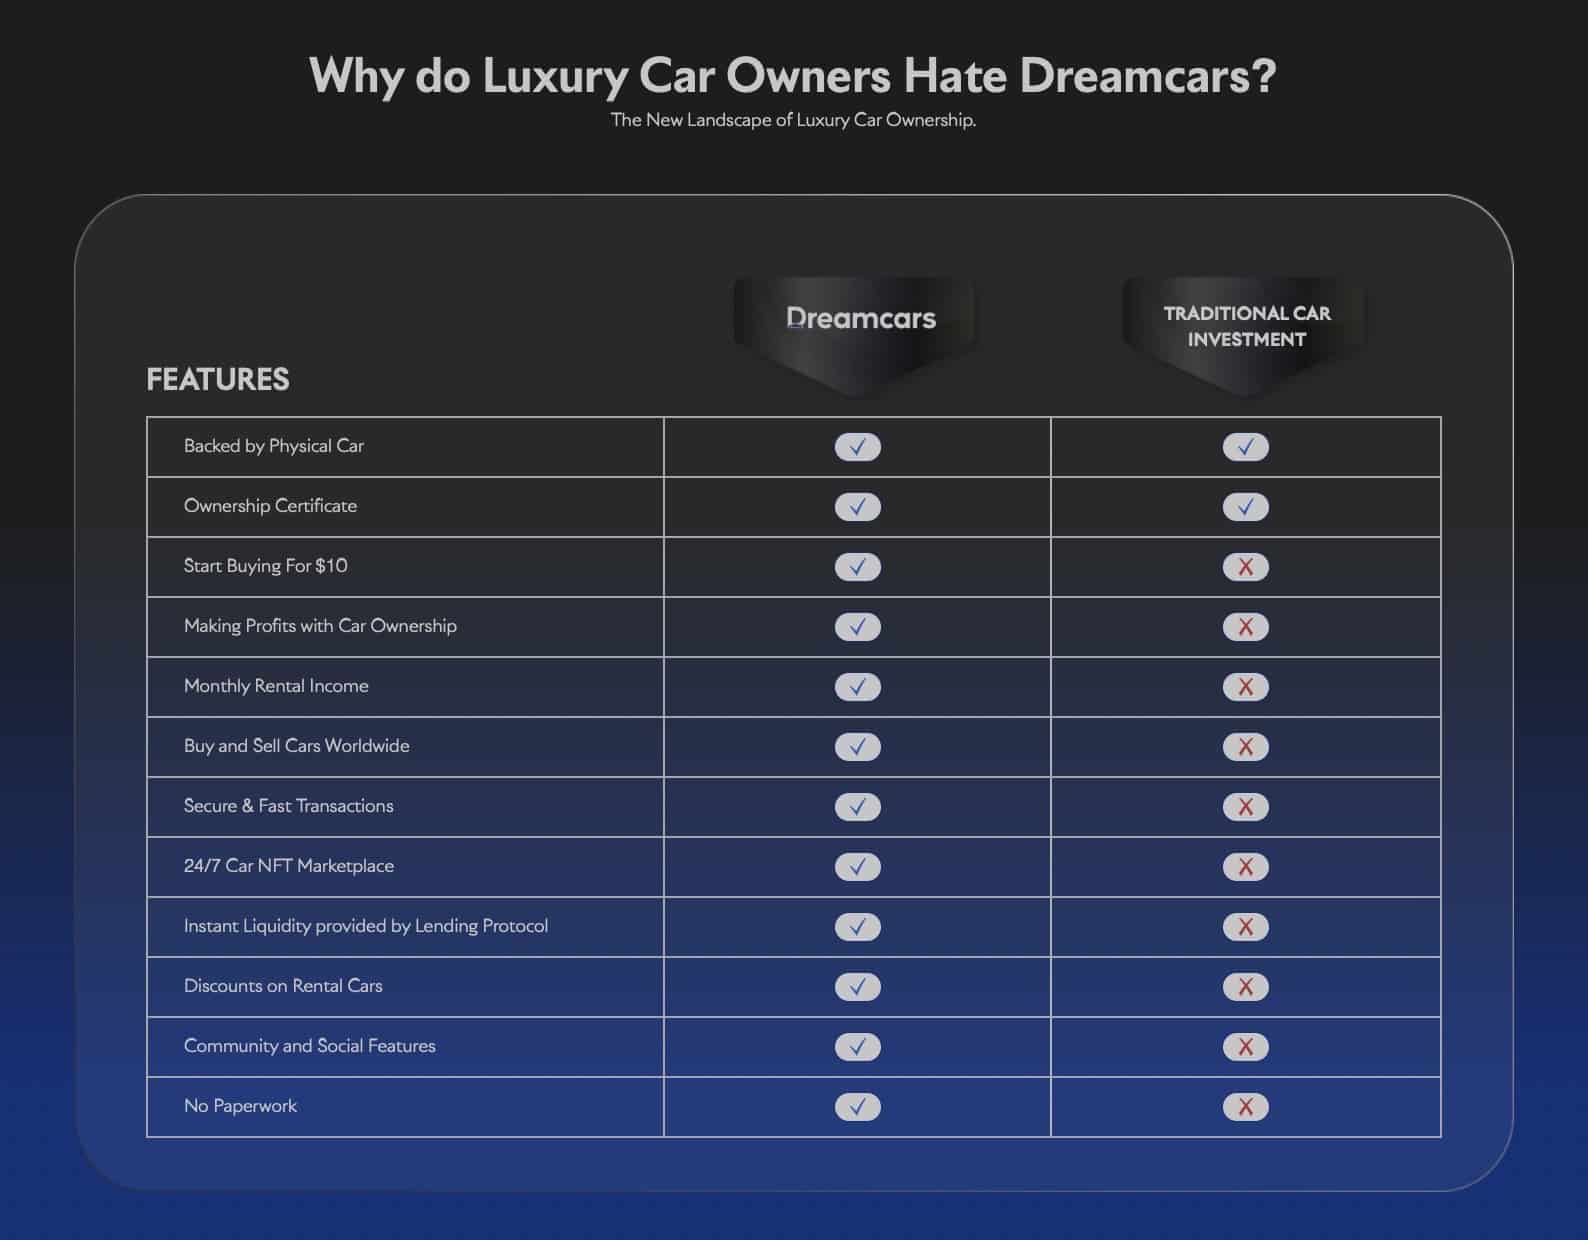 Dreamcars features